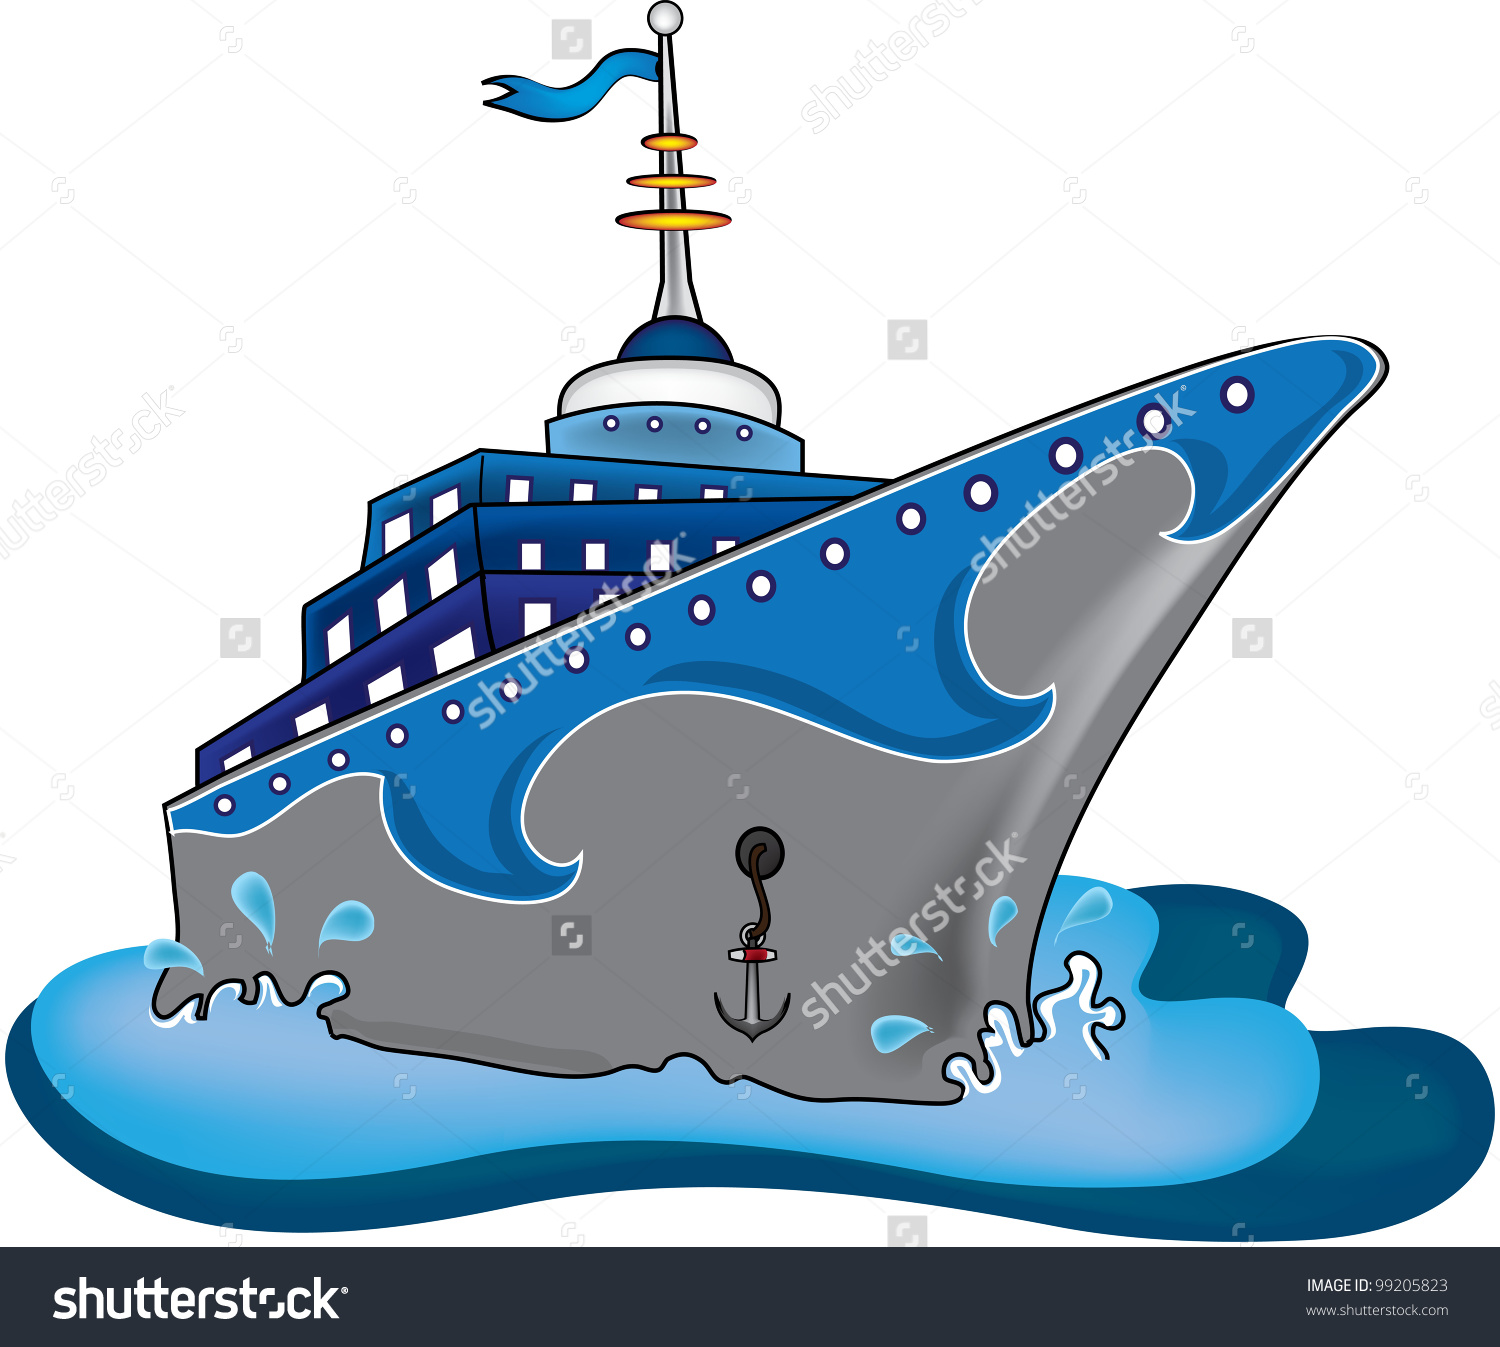 clipart picture of cruise ship - photo #14